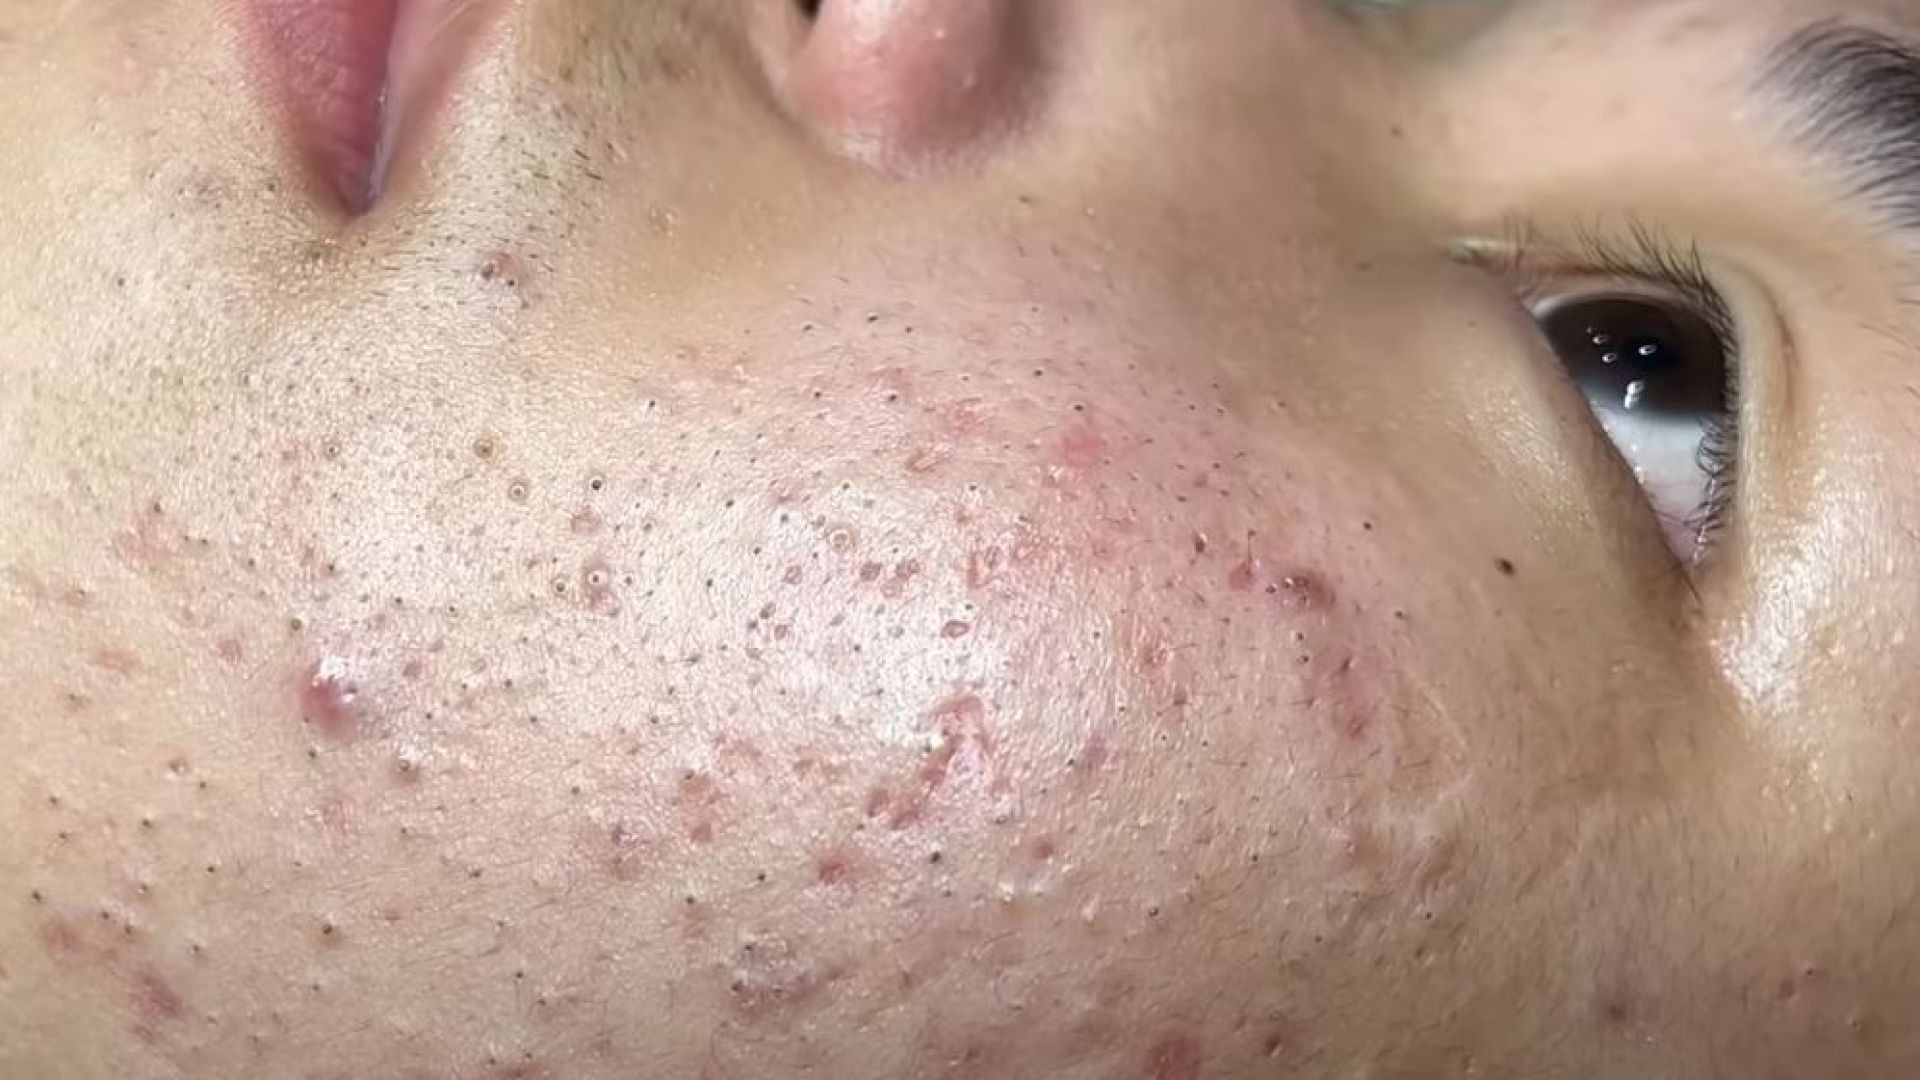 Treating Blackheads And Acne Hidden In The Nose